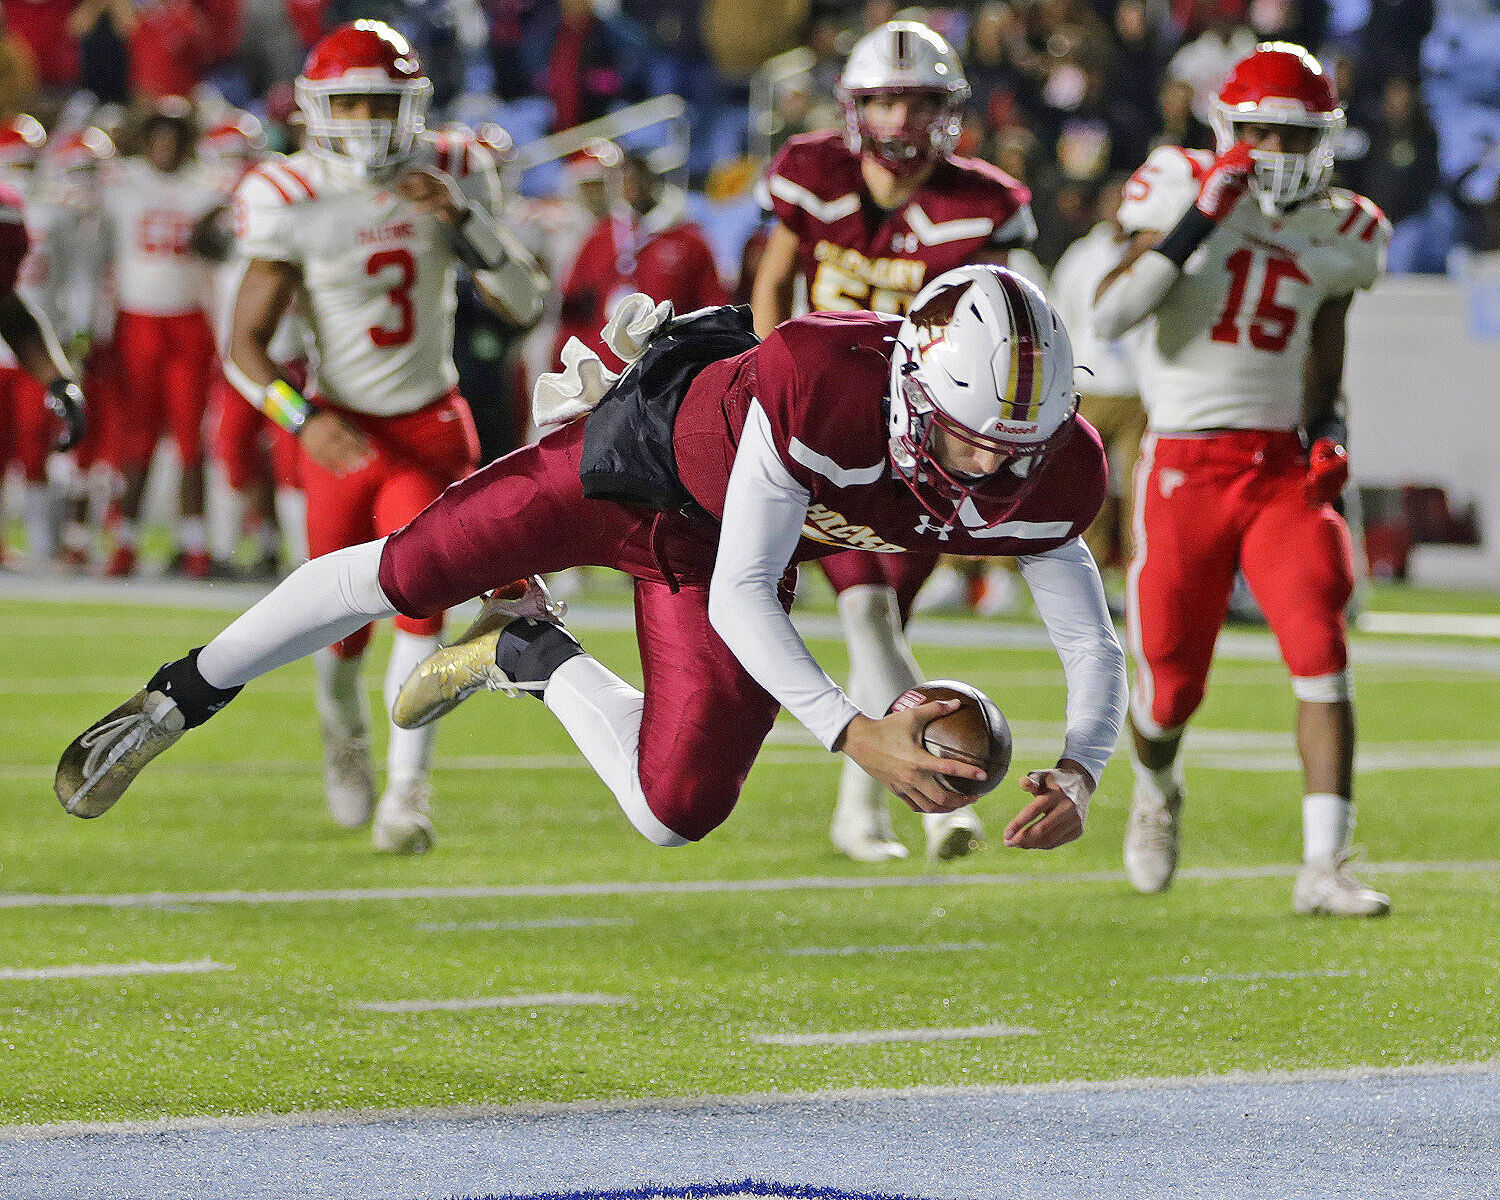 Hickory Red Tornadoes Win First Football State Championship in 27 Years